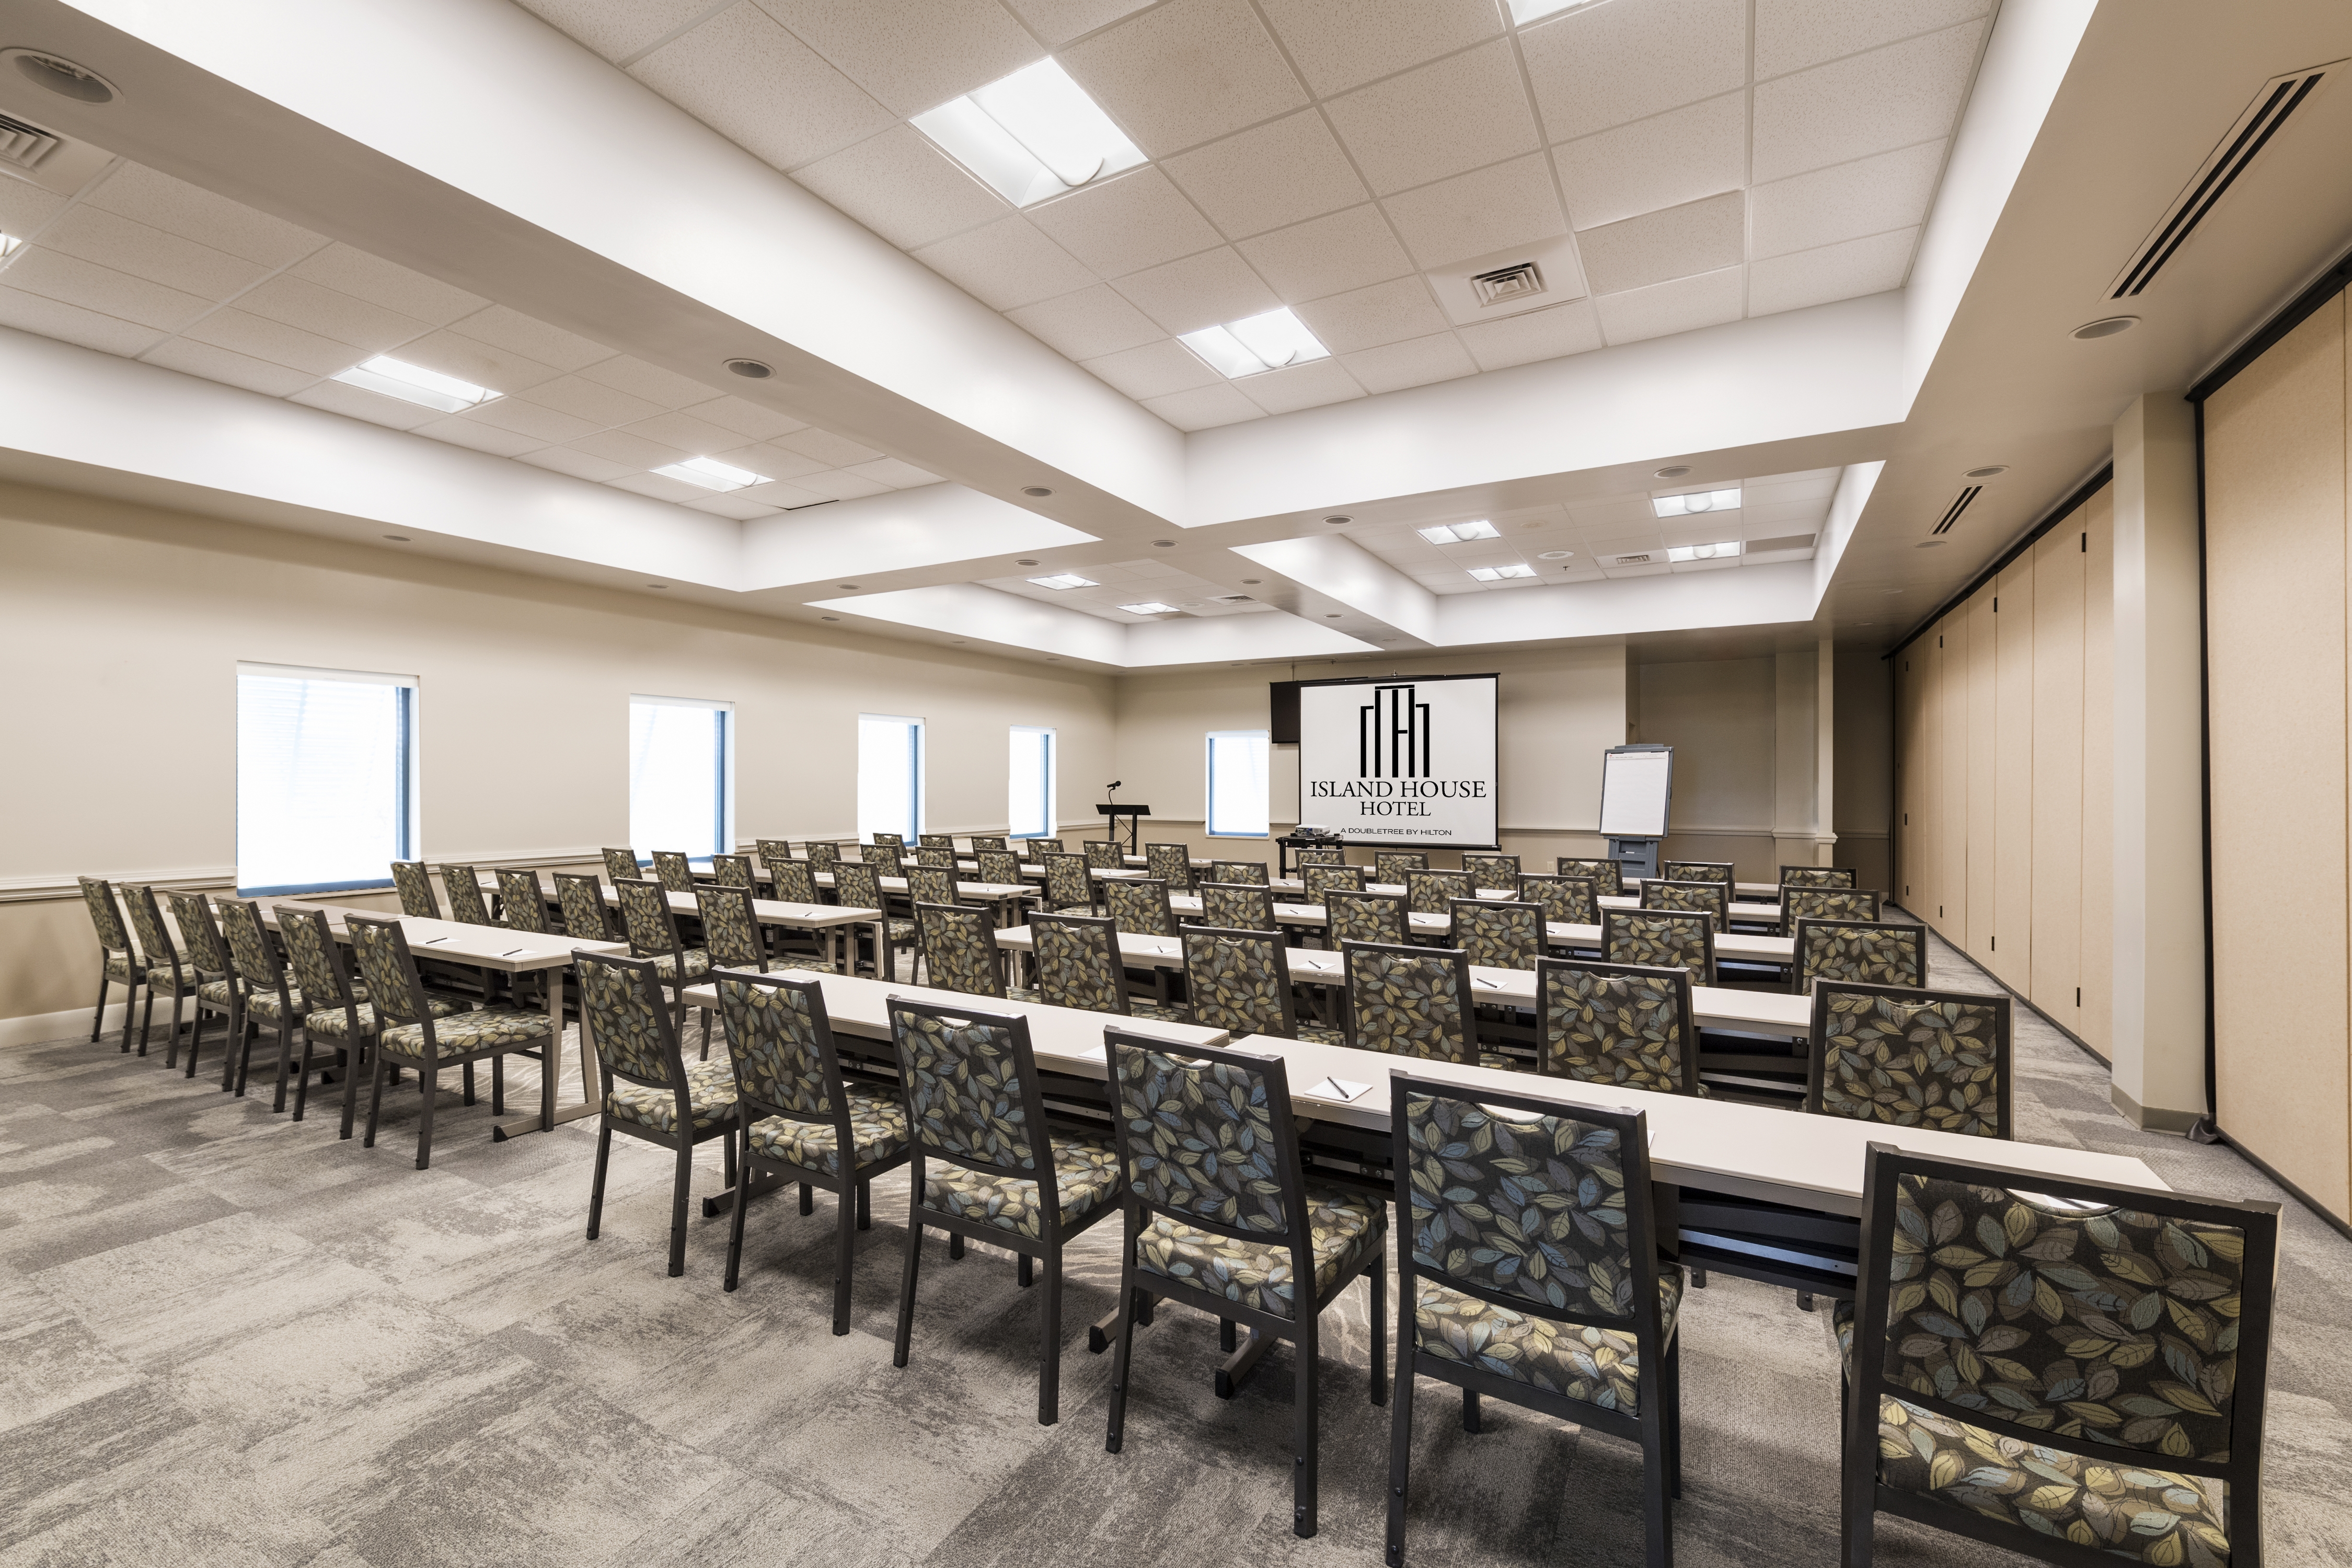 Ballroom in Classroom Setting with Long Tables and Chairs Facing Projector Screen with Outside Views